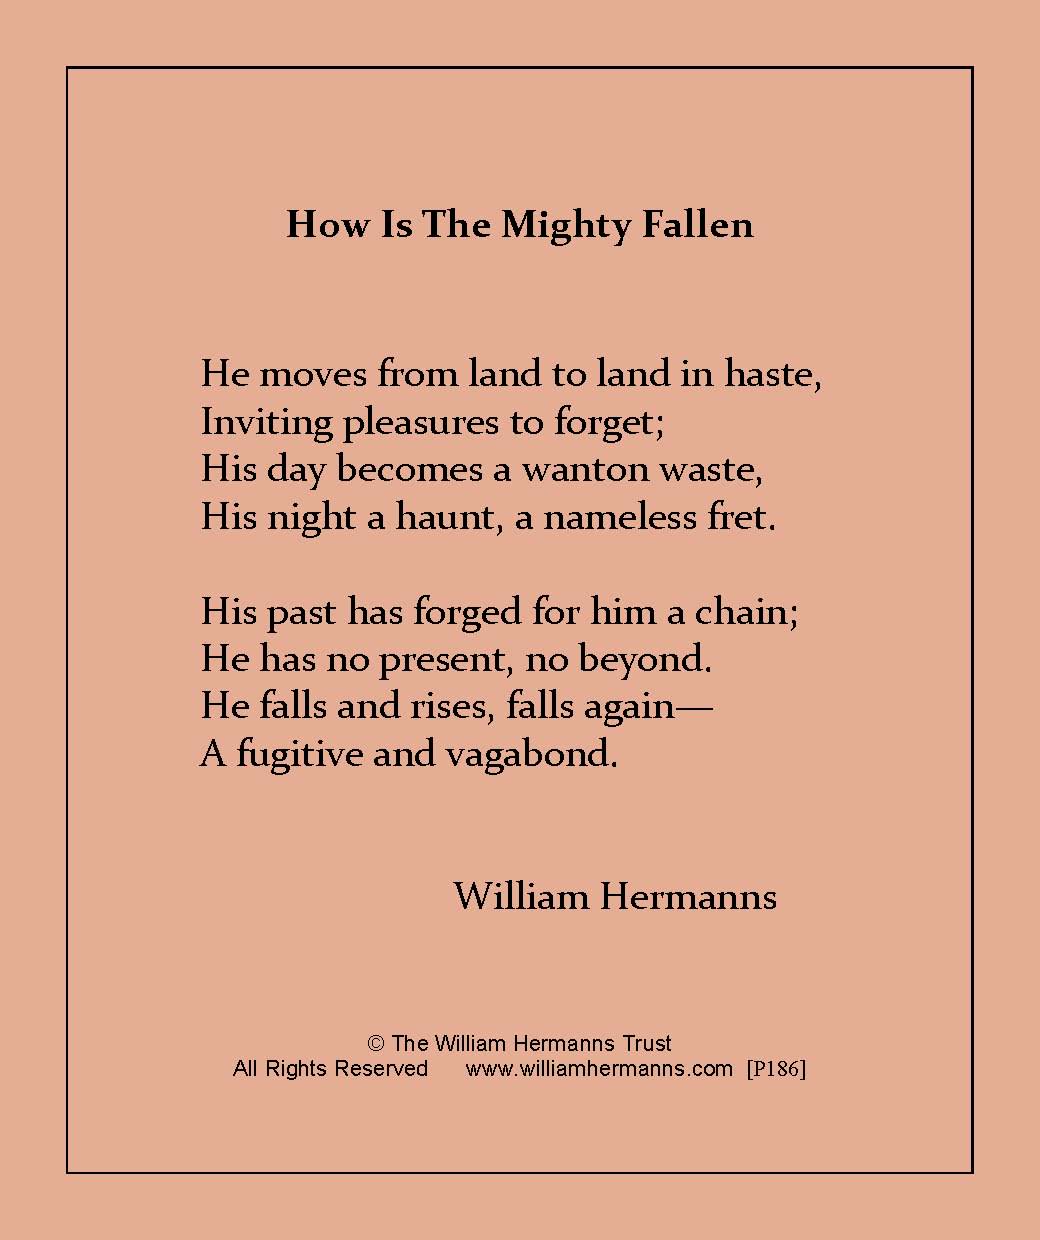 How is the Mighty Fallen by William Hermanns